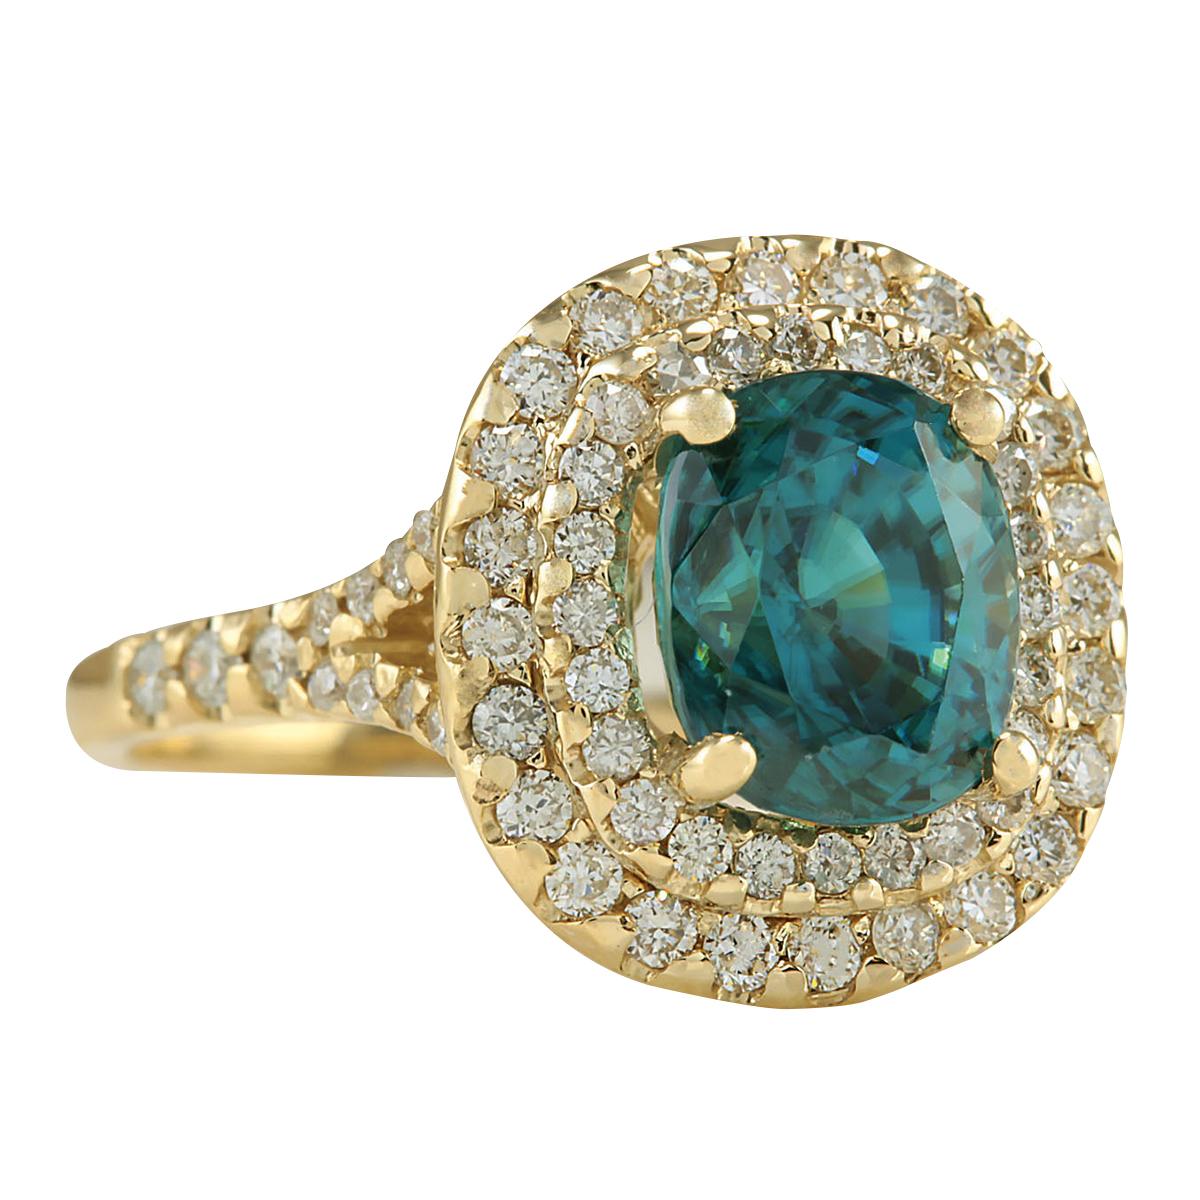 Stamped: 14K Yellow Gold
Total Ring Weight: 4.8 Grams
Total Natural Zircon Weight is 4.46 Carat (Measures: 9.00x7.00 mm)
Color: Blue
Total Natural Diamond Weight is 0.75 Carat
Color: F-G, Clarity: VS2-SI1
Face Measures: 14.60x13.60 mm
Sku: [702091W]